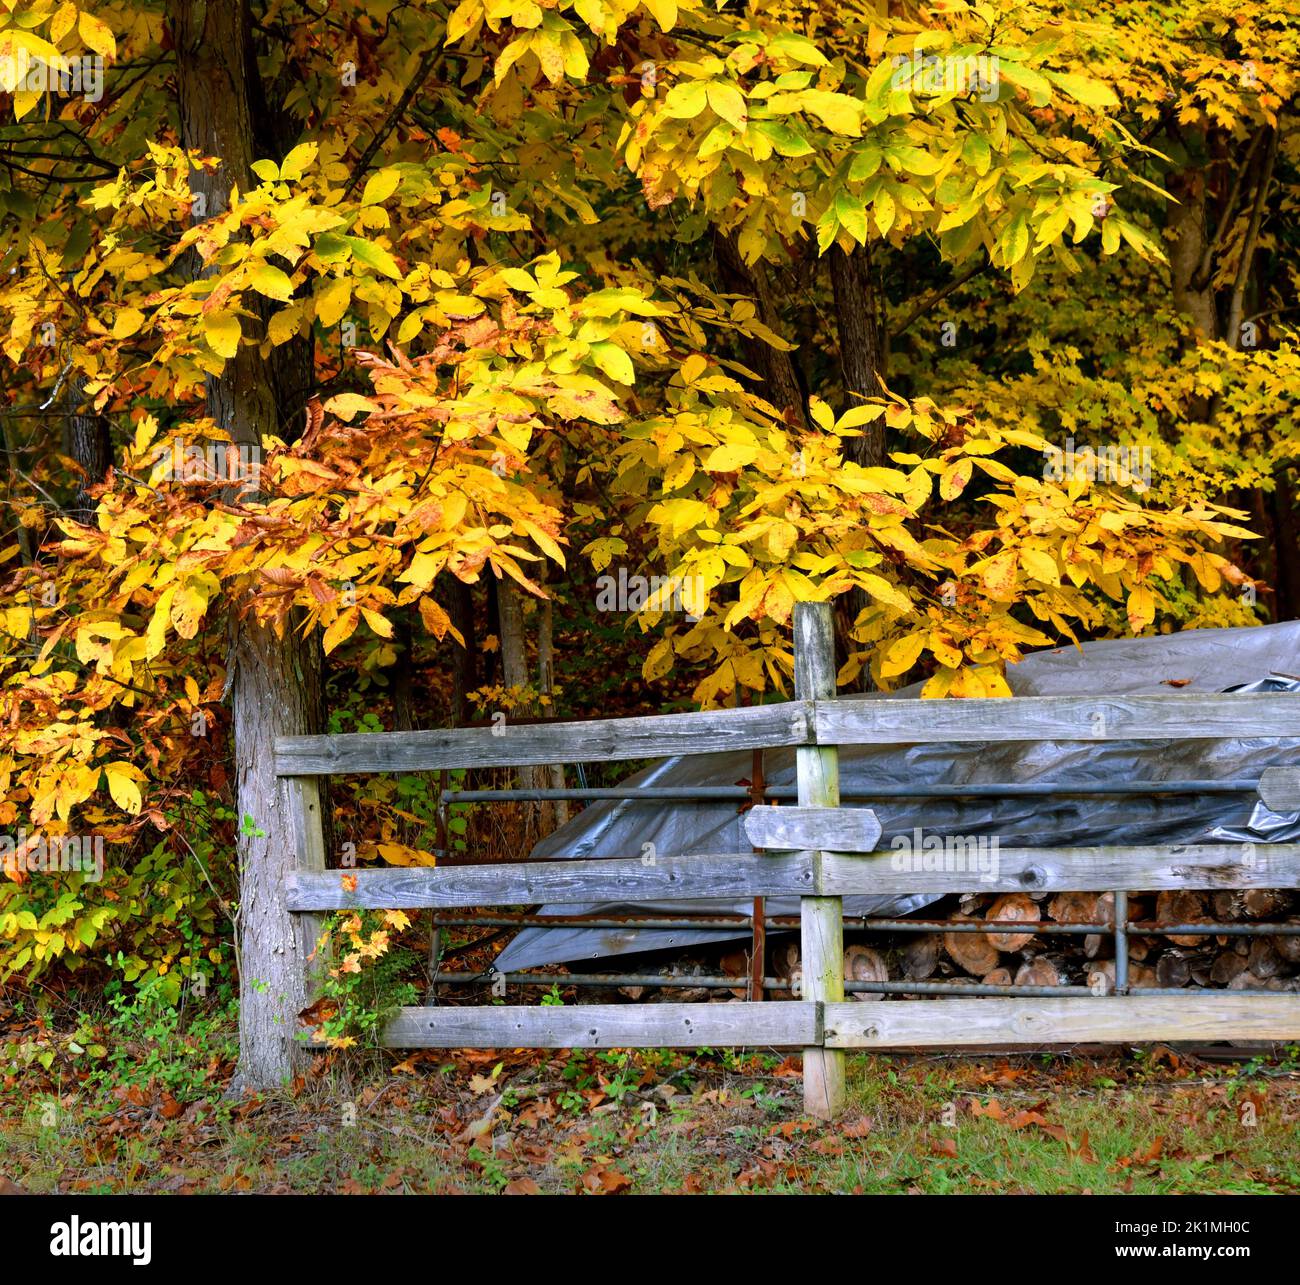 Rustic fence stands beneath a hickory tree that has turned golden yellow for the Fall.  Wood pile can be seen behind fence. Stock Photo